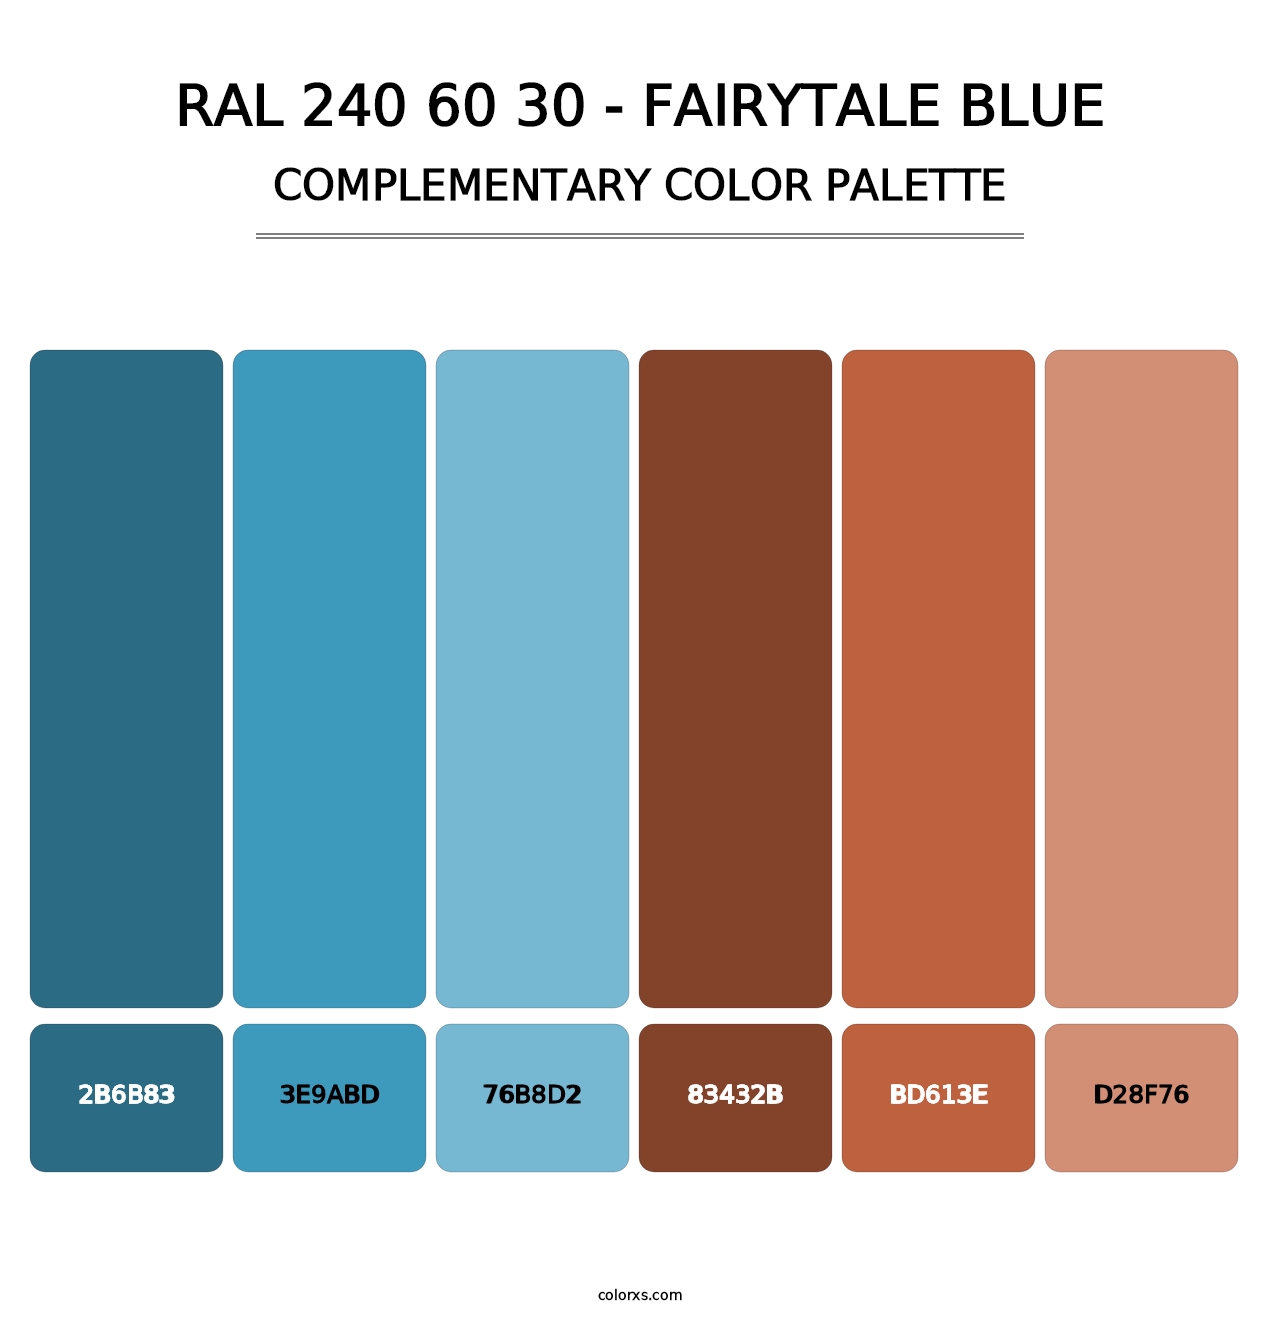 RAL 240 60 30 - Fairytale Blue - Complementary Color Palette